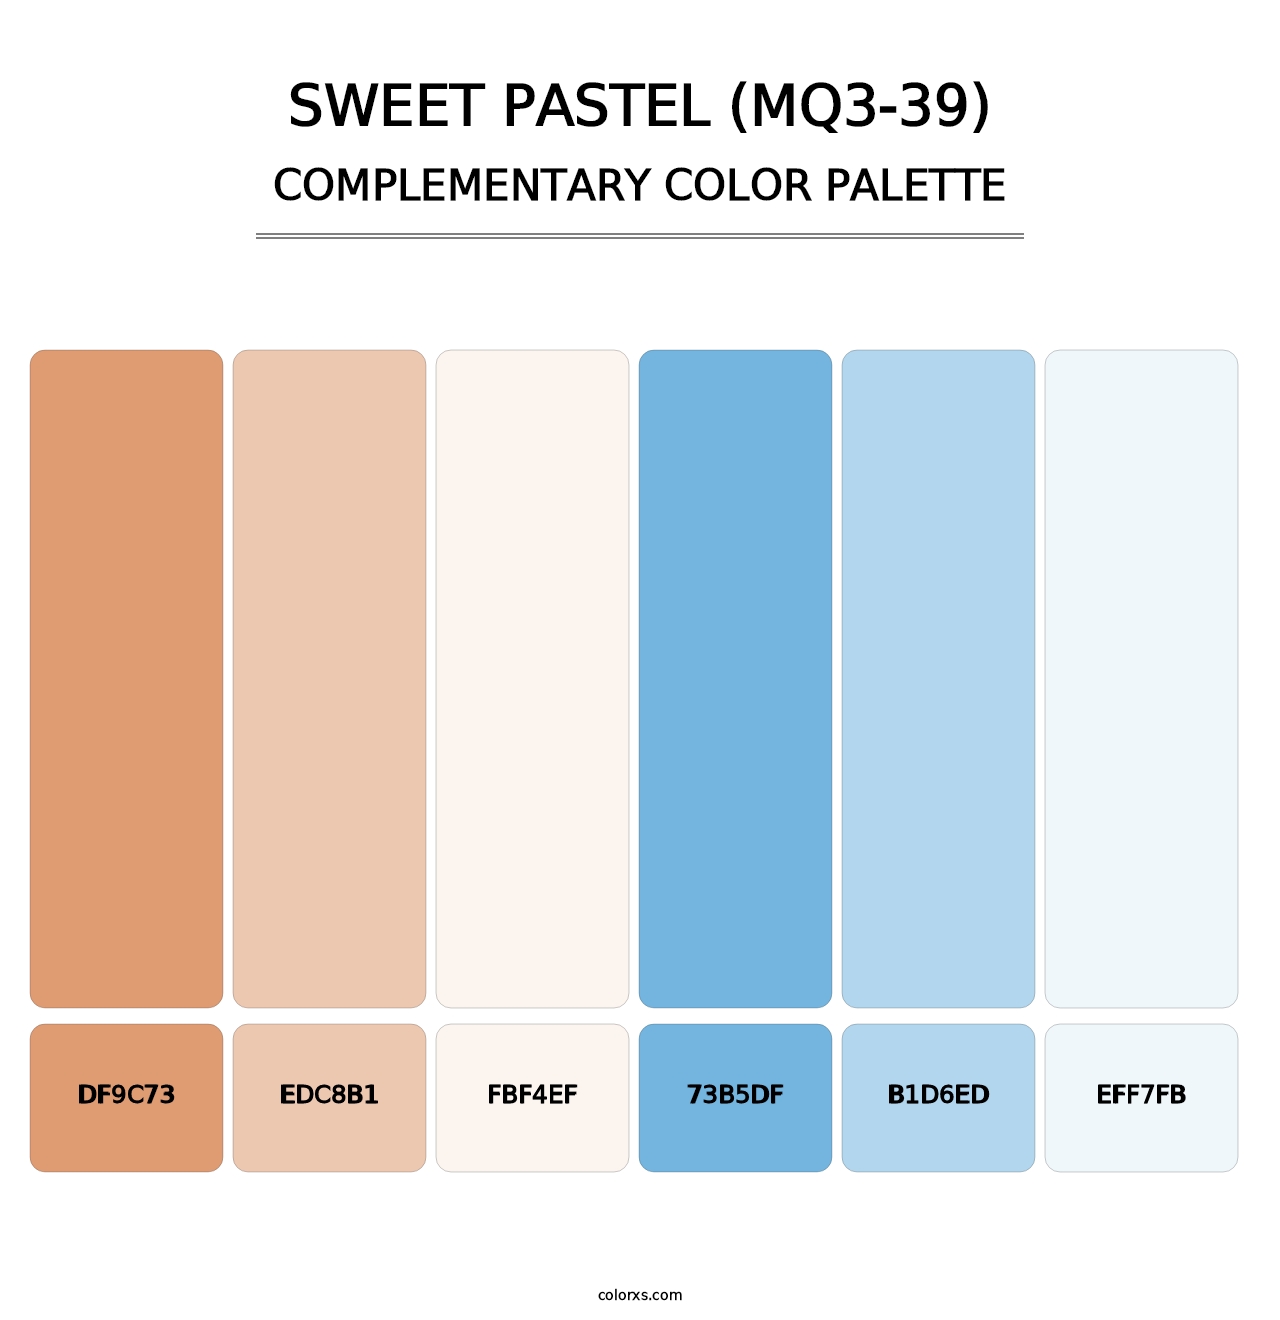 Sweet Pastel (MQ3-39) - Complementary Color Palette